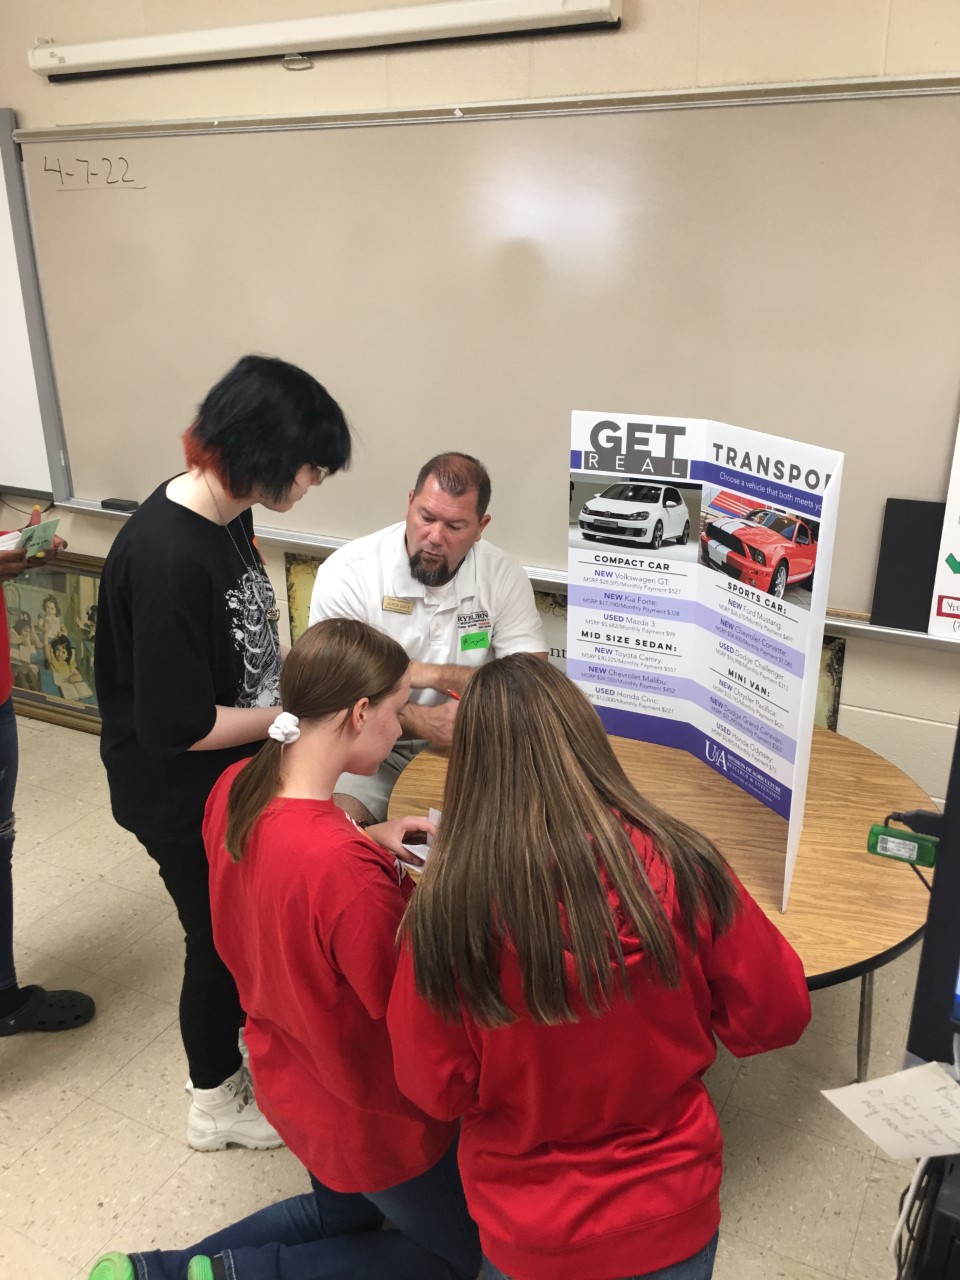 adult and students looking at display on transportation